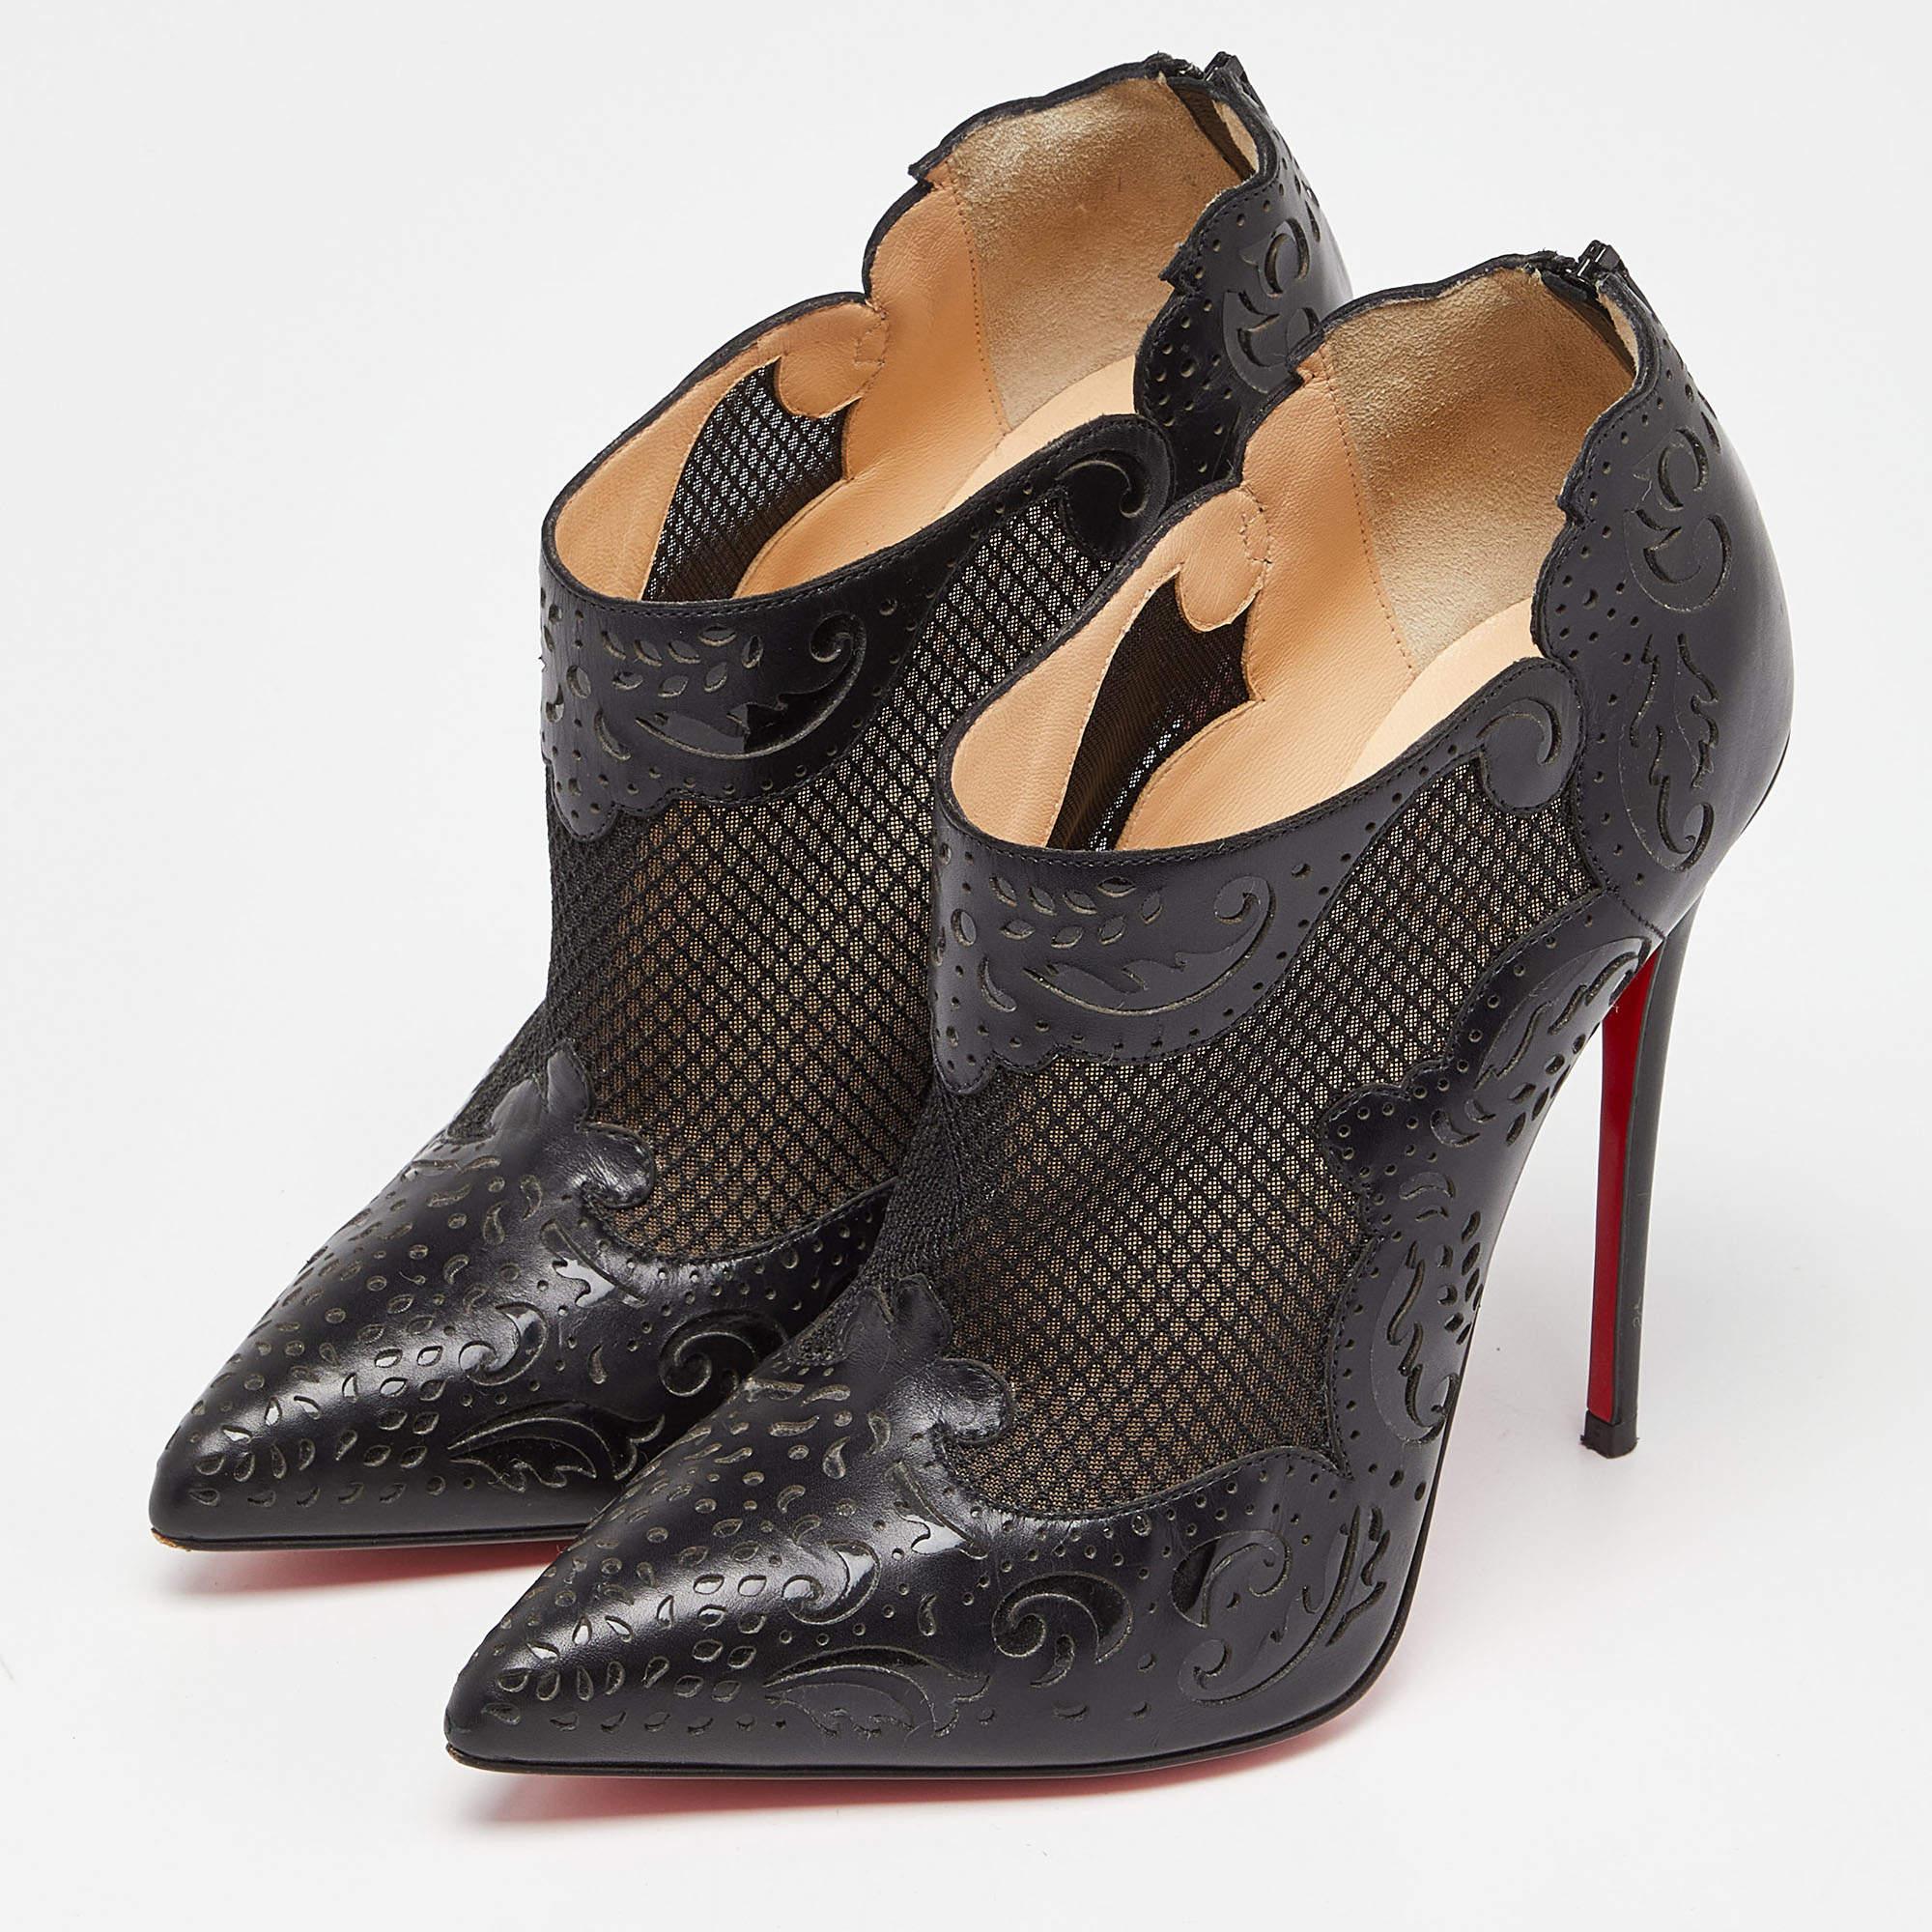 Christian Louboutin Black Leather and Mesh Ankle Booties Size 38 In Good Condition For Sale In Dubai, Al Qouz 2